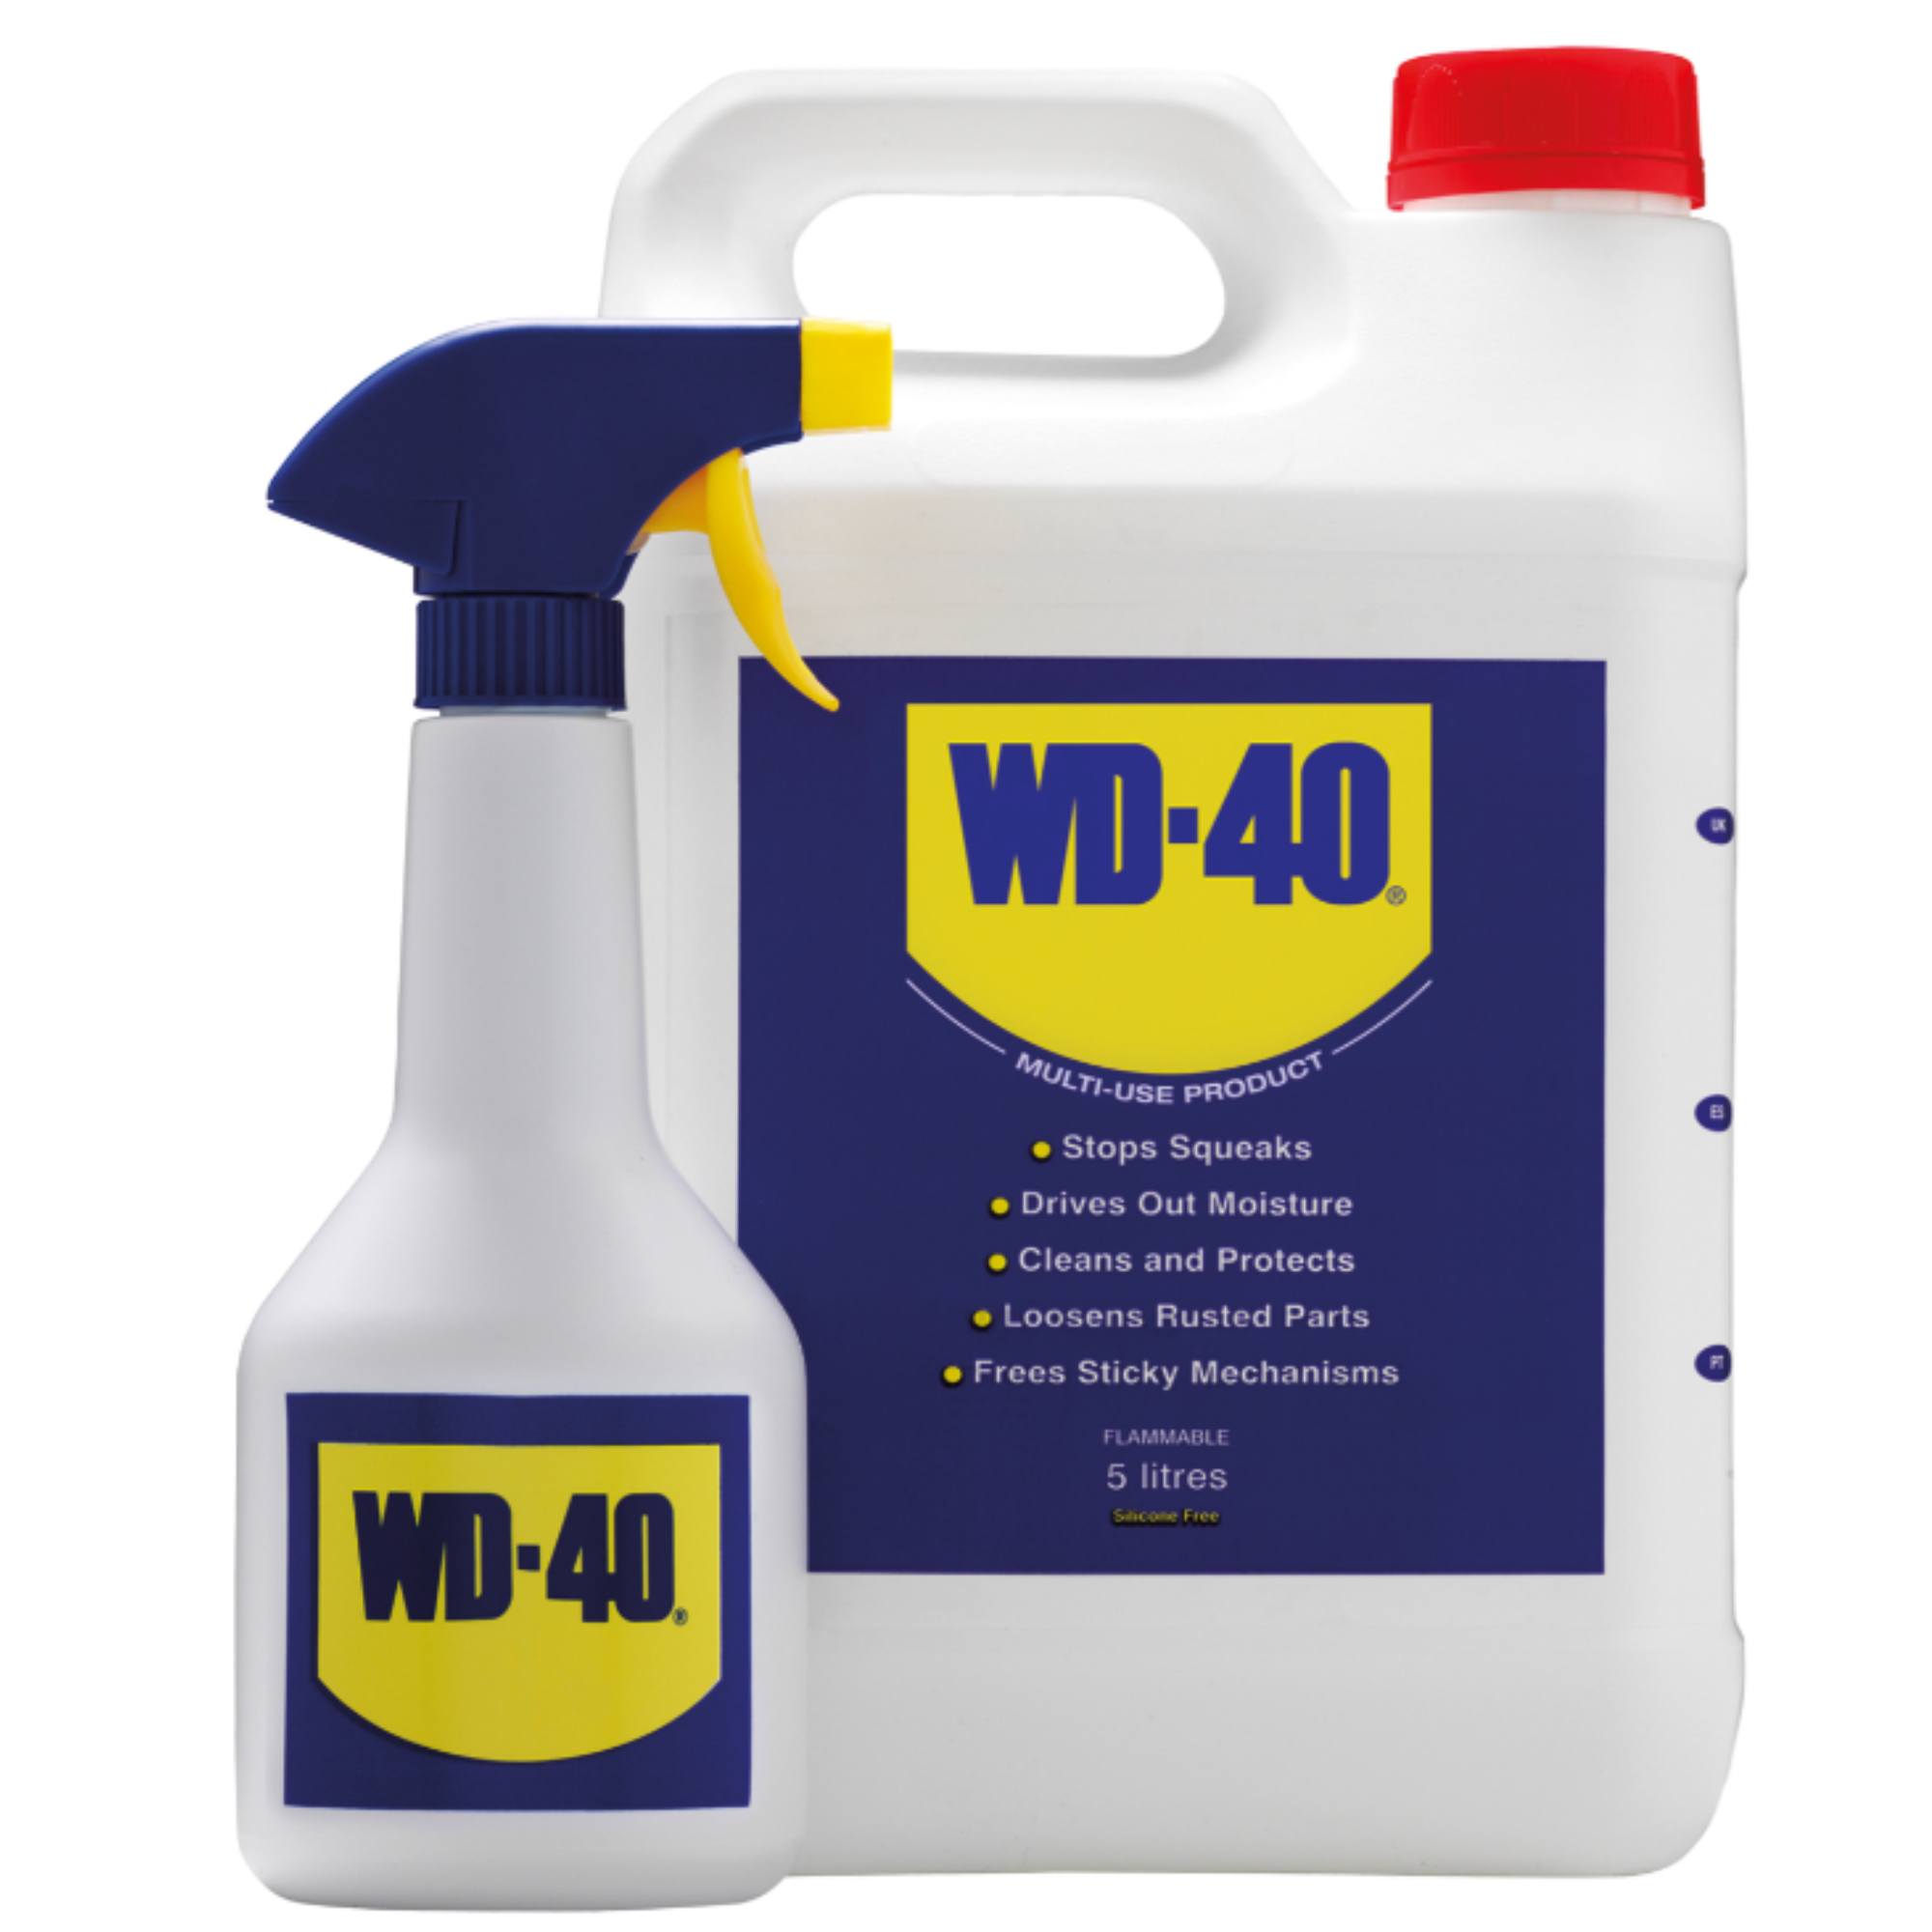 WD-40 With Spray Applicator - 5 Litre